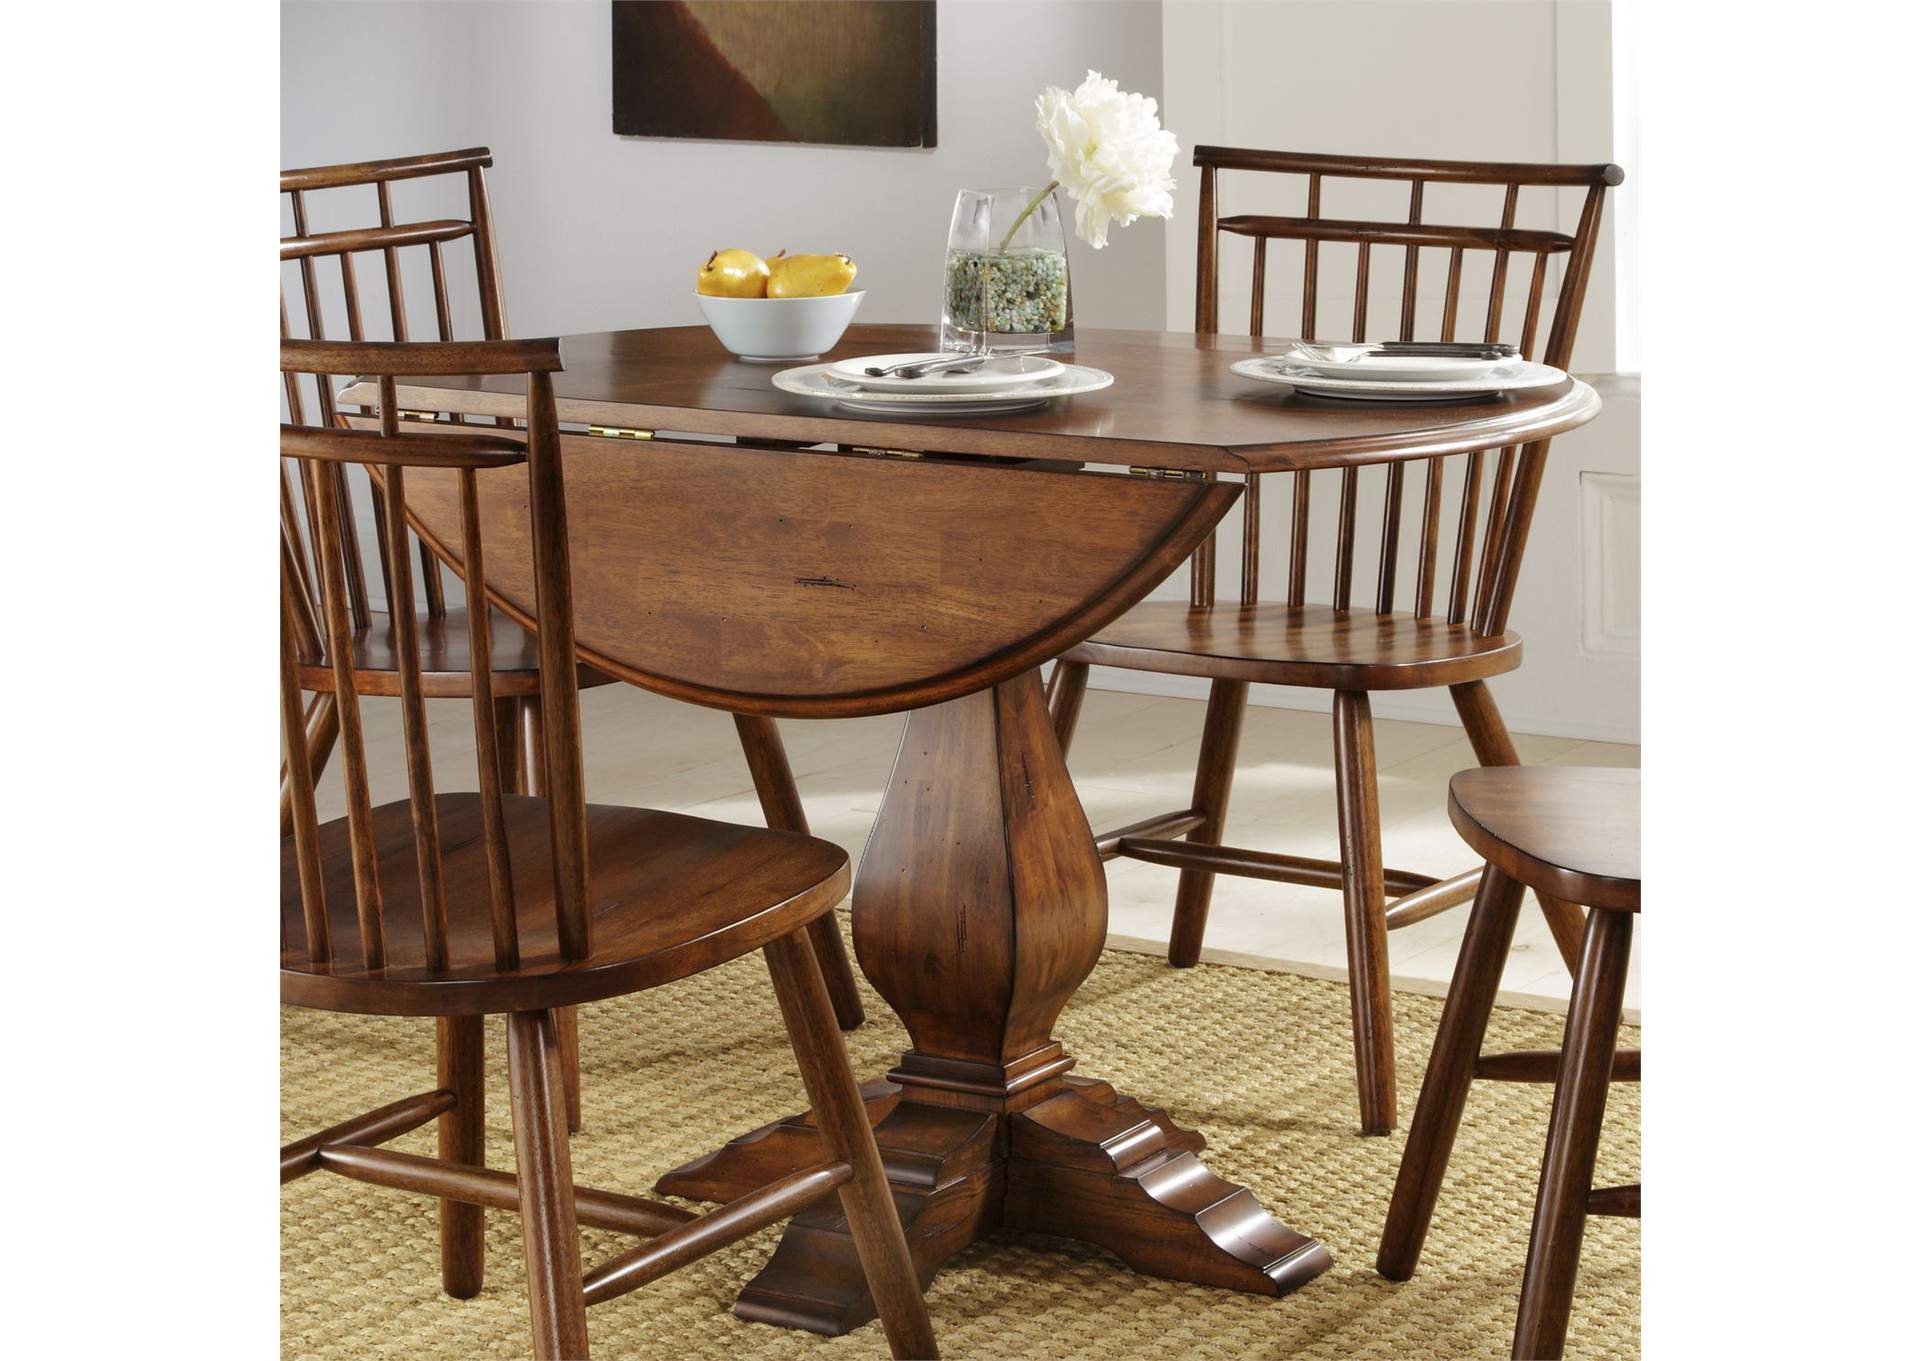 Creations II Tobacco Drop Leaf Dining Table,Liberty